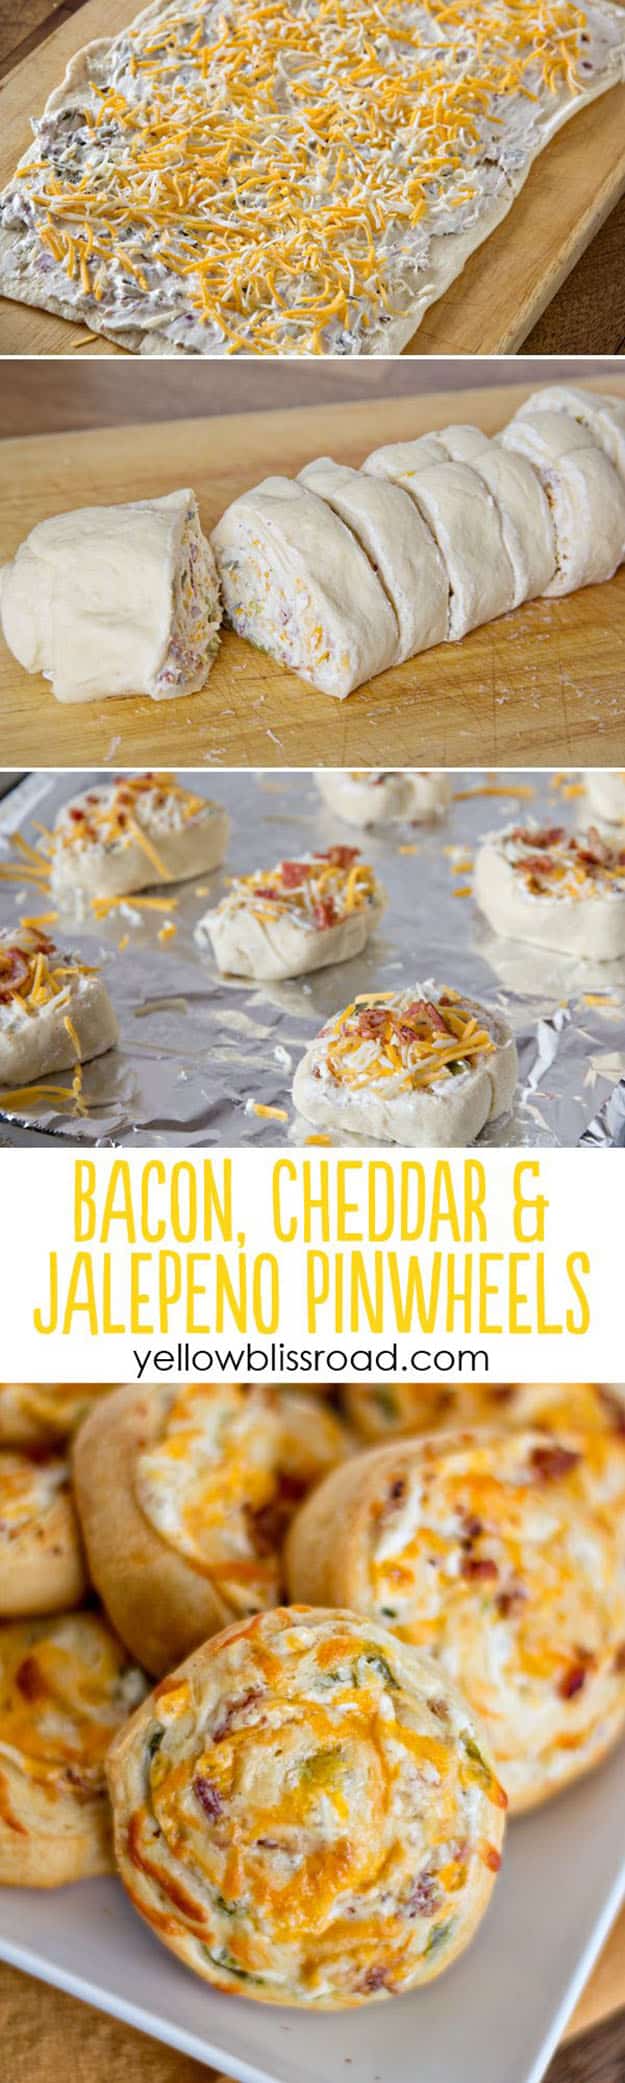 Cheap Party Food Ideas |Easy DIY Recipe for Bacon & Cheese Pinwheels | DIY Projects and Crafts by DIY JOY #appetizers #partyfood #recipes